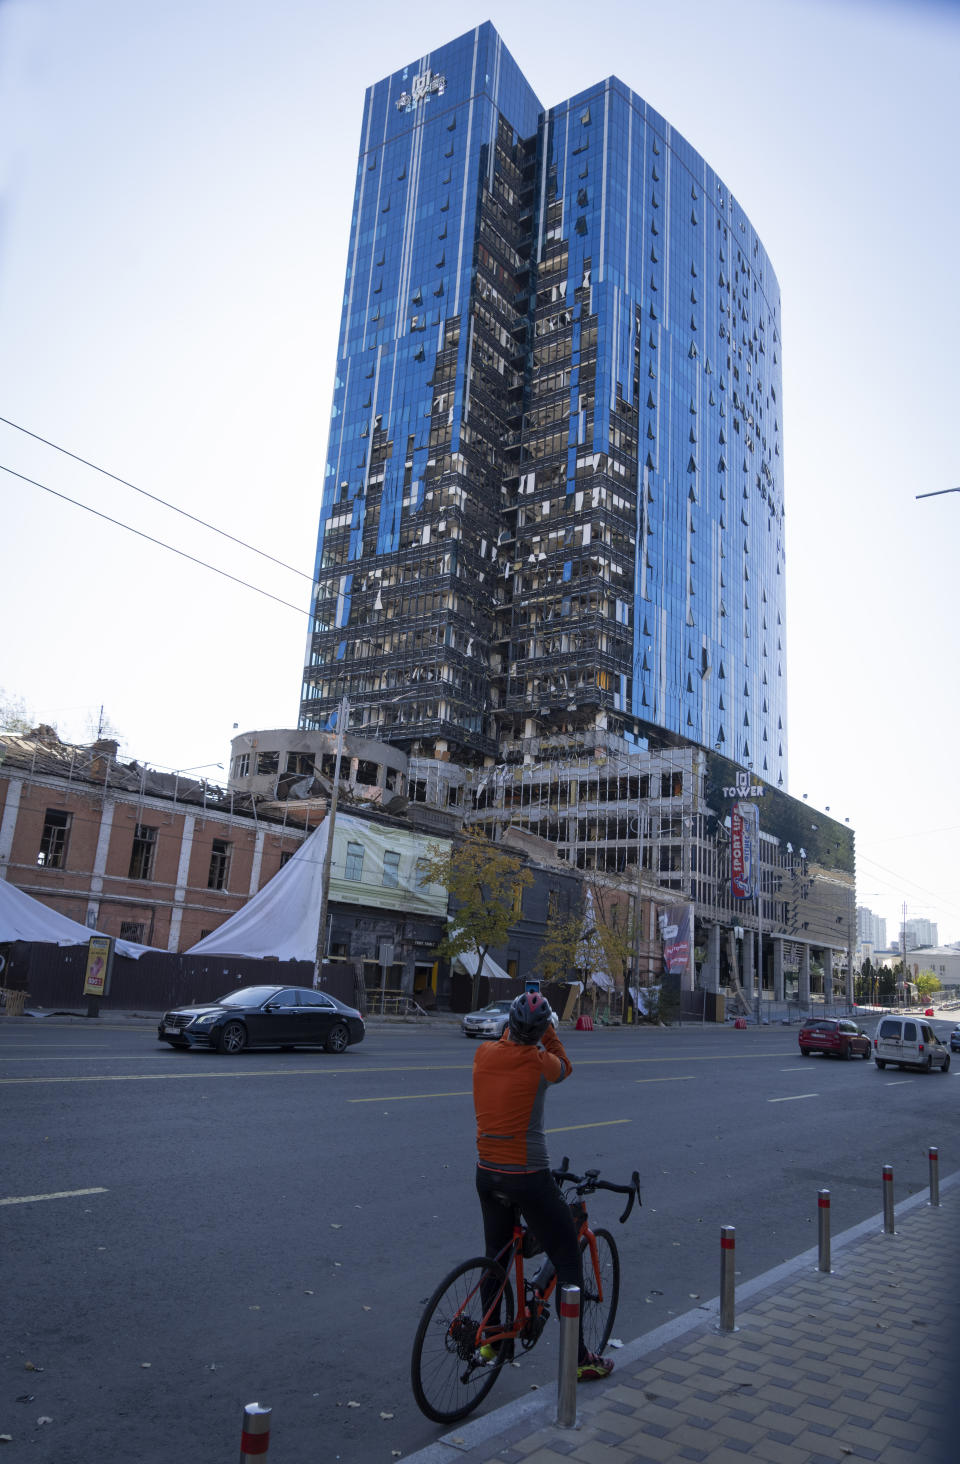 A cyclist takes a photo of an office center and a building damaged in a Russian rocket attack a week ago, in central Kyiv, Ukraine, Sunday, Oct. 16, 2022. (AP Photo/Efrem Lukatsky)